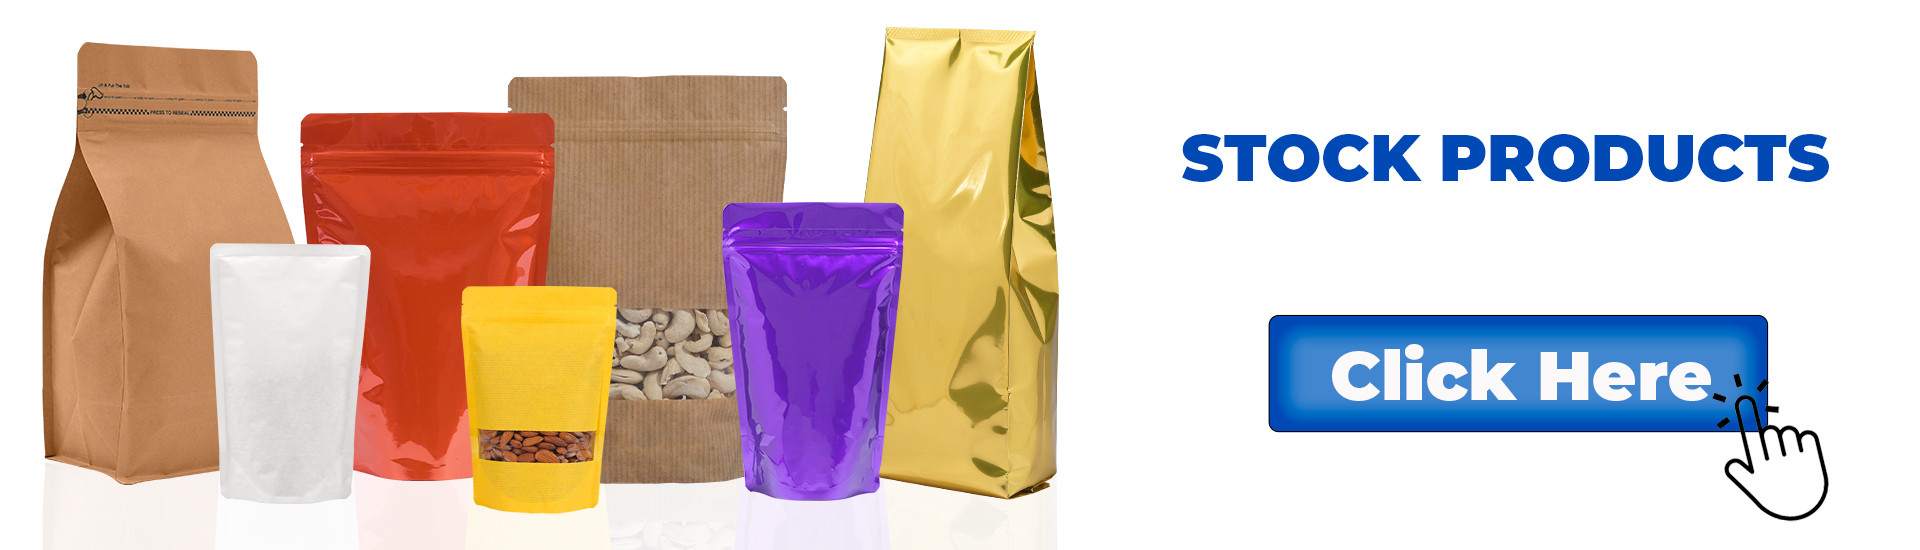 stock products packaging bag